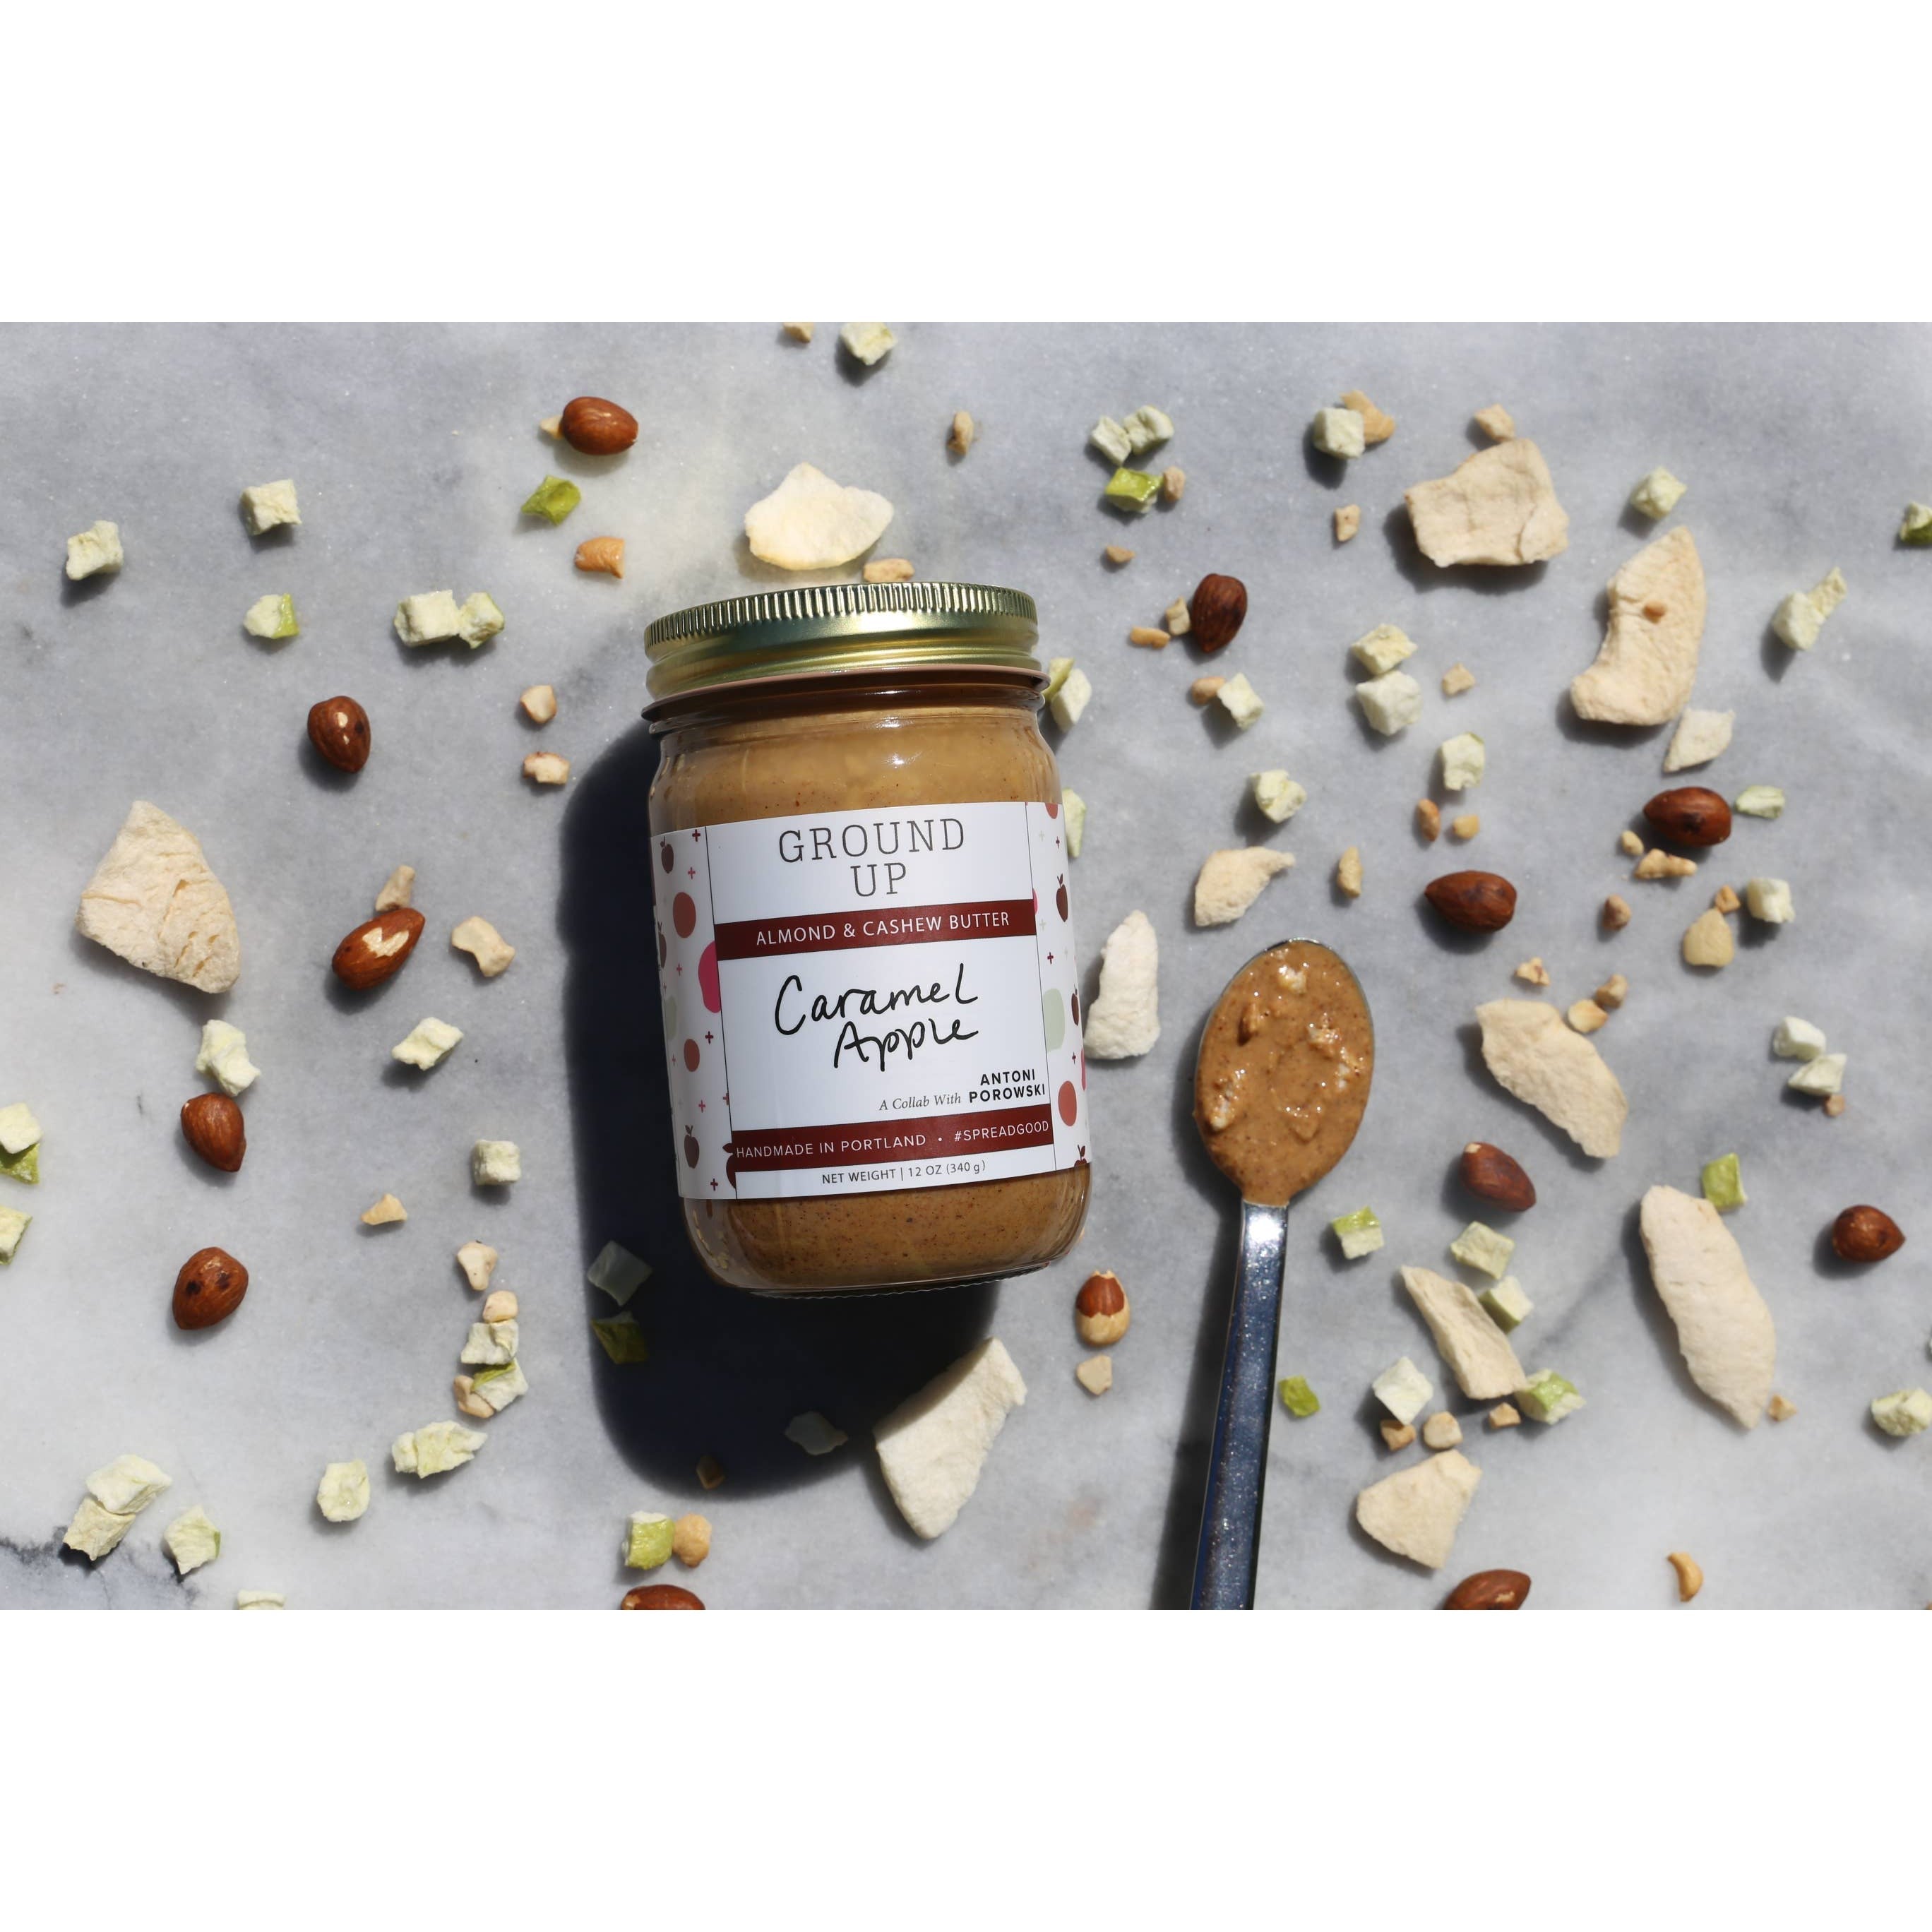 Caramel Apple Almond + Cashew Butter (*Local Pickup/Local Delivery Only)